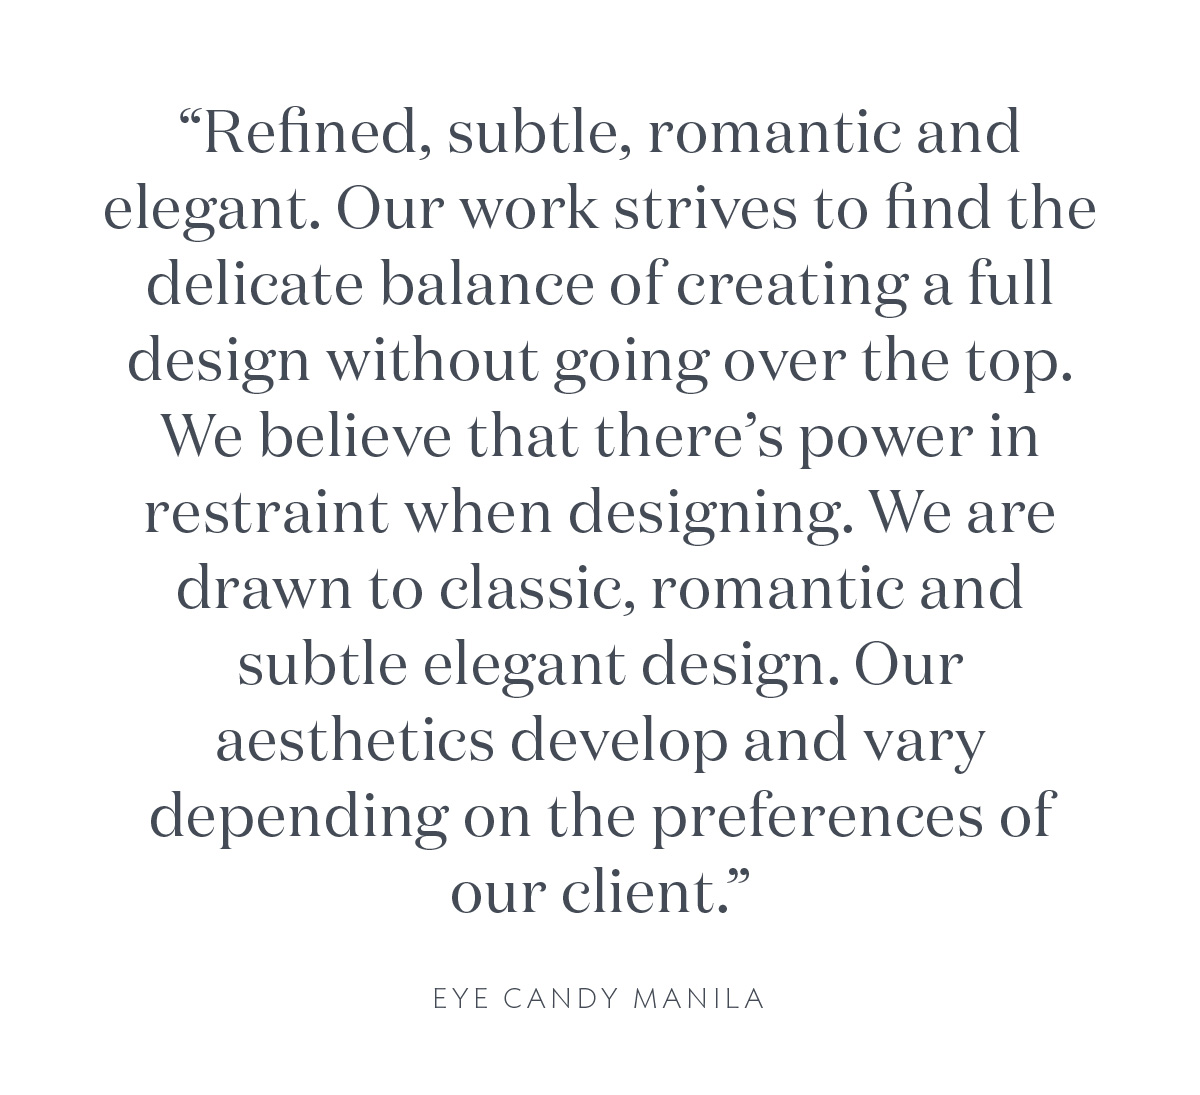 "Refined, subtle, romantic and elegant. Our work strives to find the delicate balance of creating a full design without going over the top. We believe that there's power in restraint when designing. We are drawn to classic, romantic and subtle elegant design. Our aesthetics develop and vary depending on the preferences of our client." Eye Candy Manila